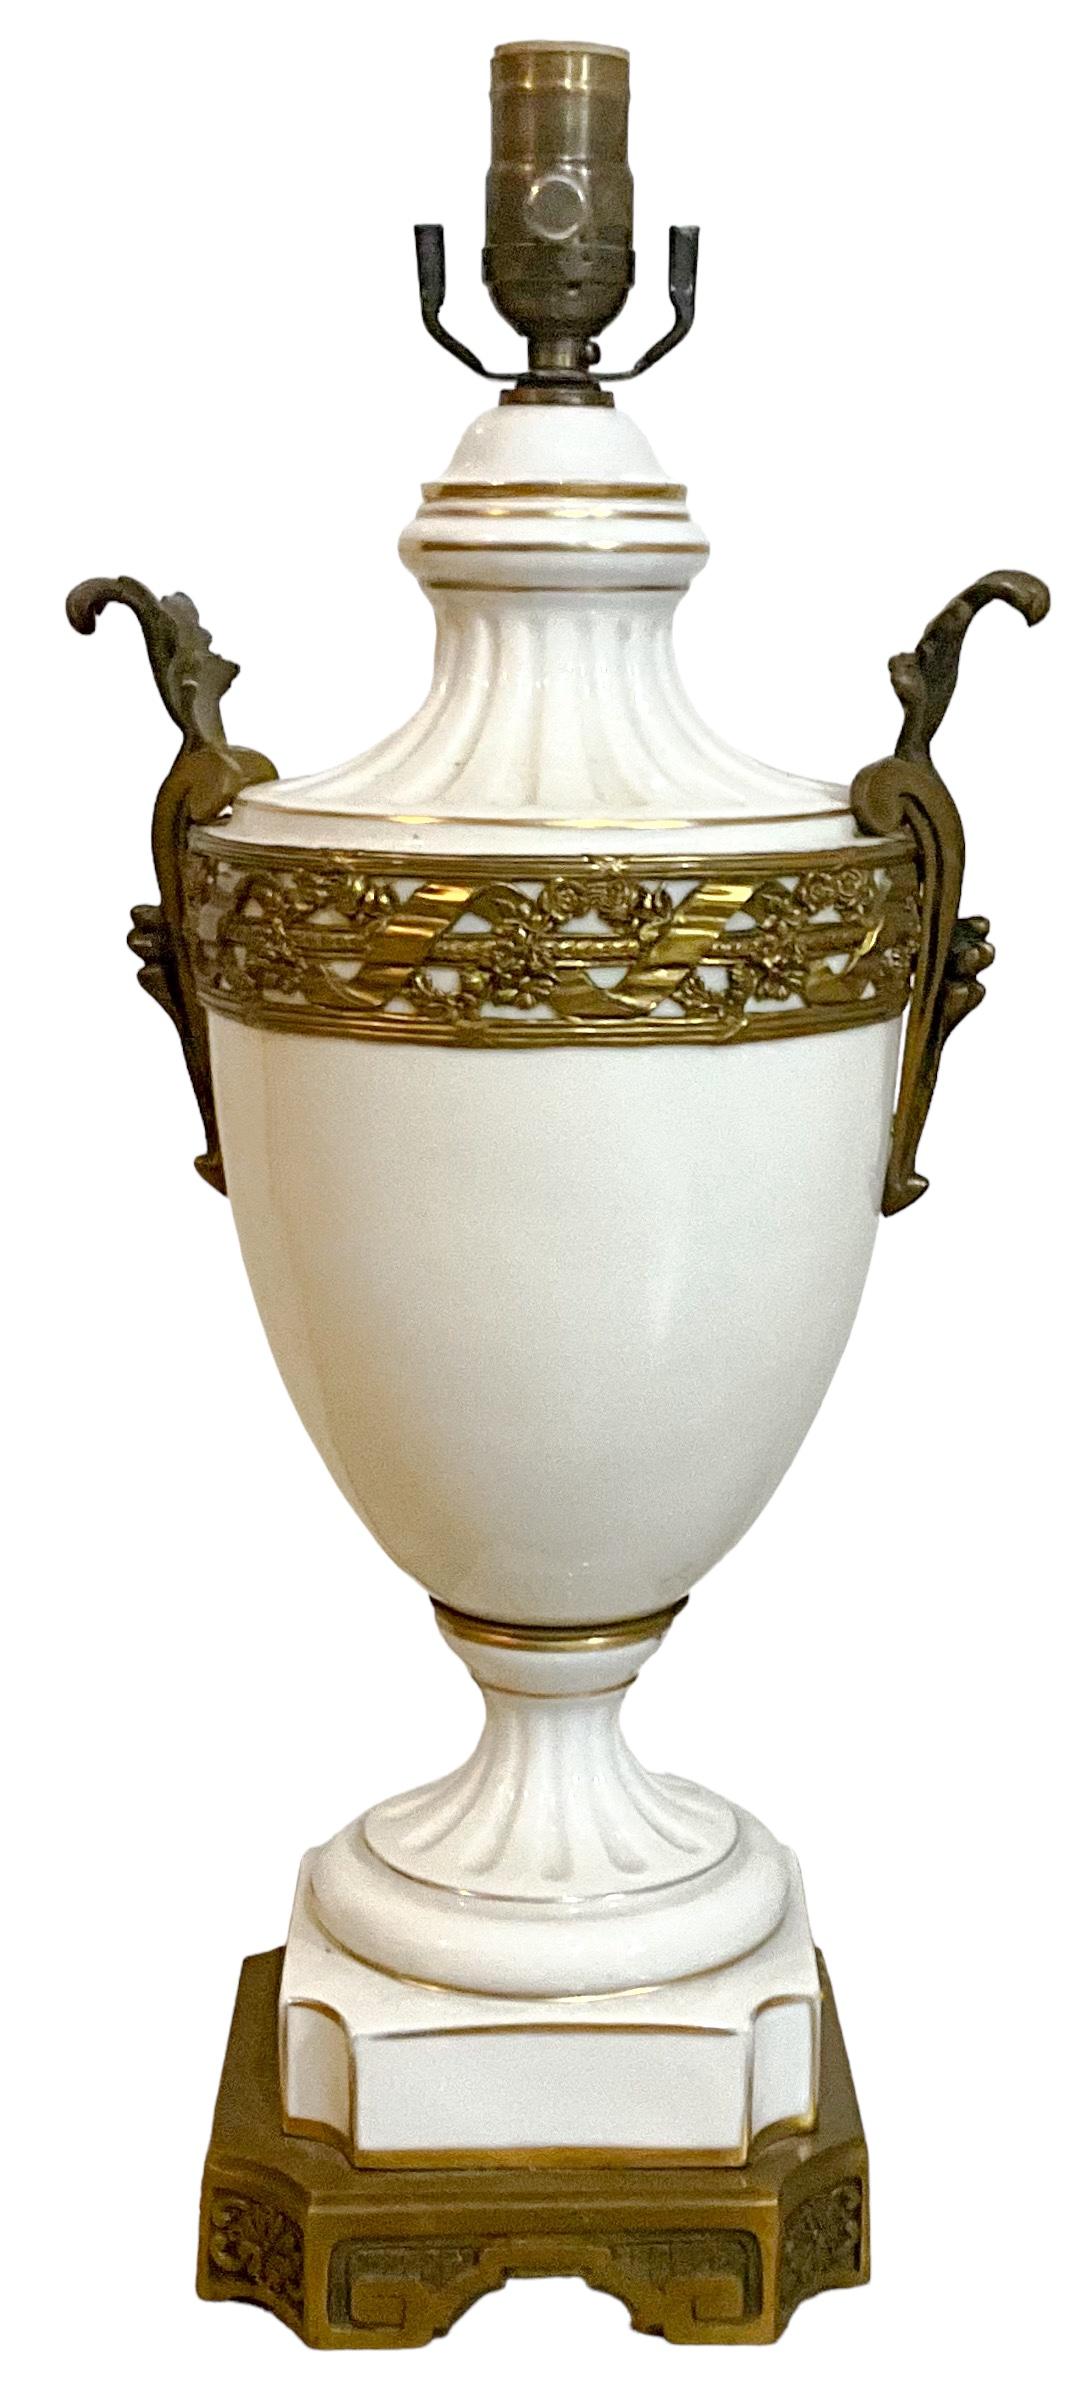 Neoclassical 19th-C. French Neo-Classical Style Porcelain & Gilt Bronze Table Lamps - Pair For Sale